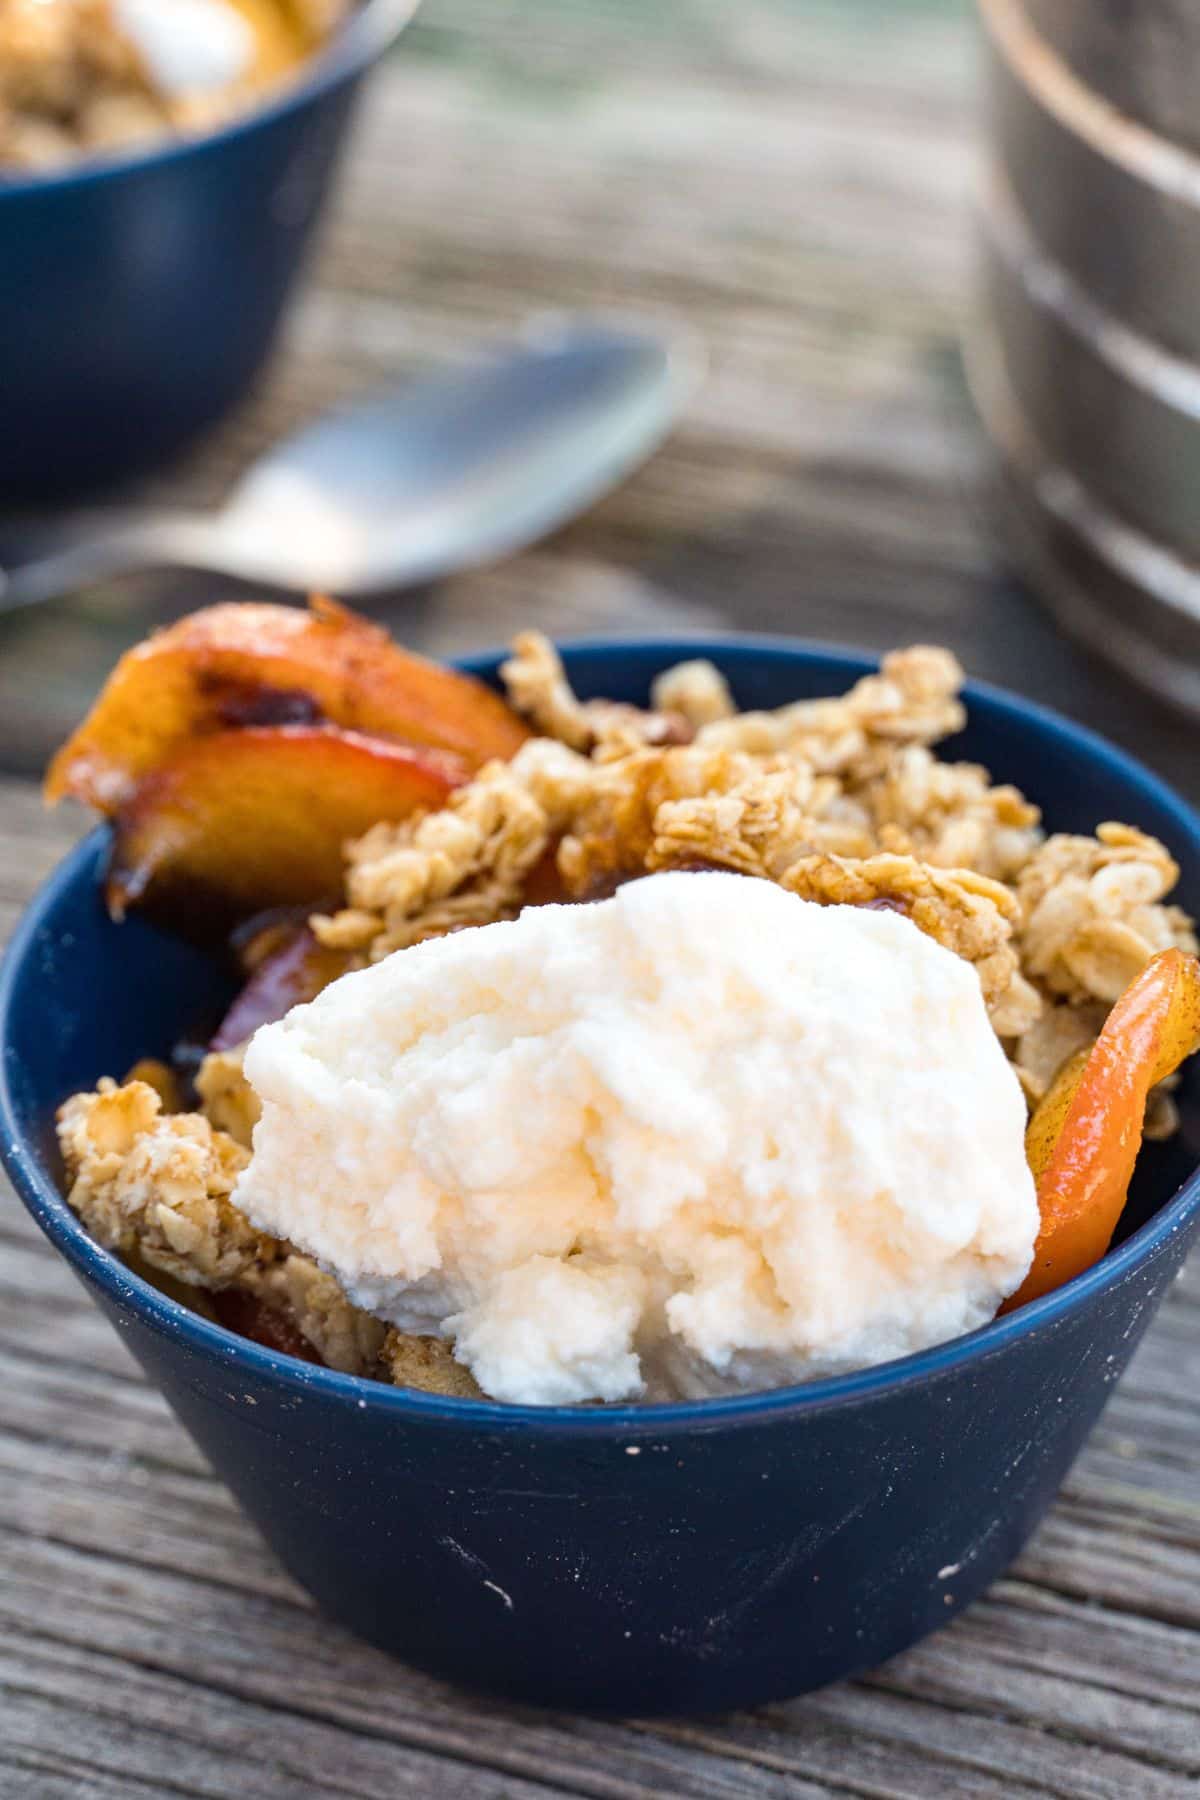 A scoop of ice cream in a small bowl with apple crisp.